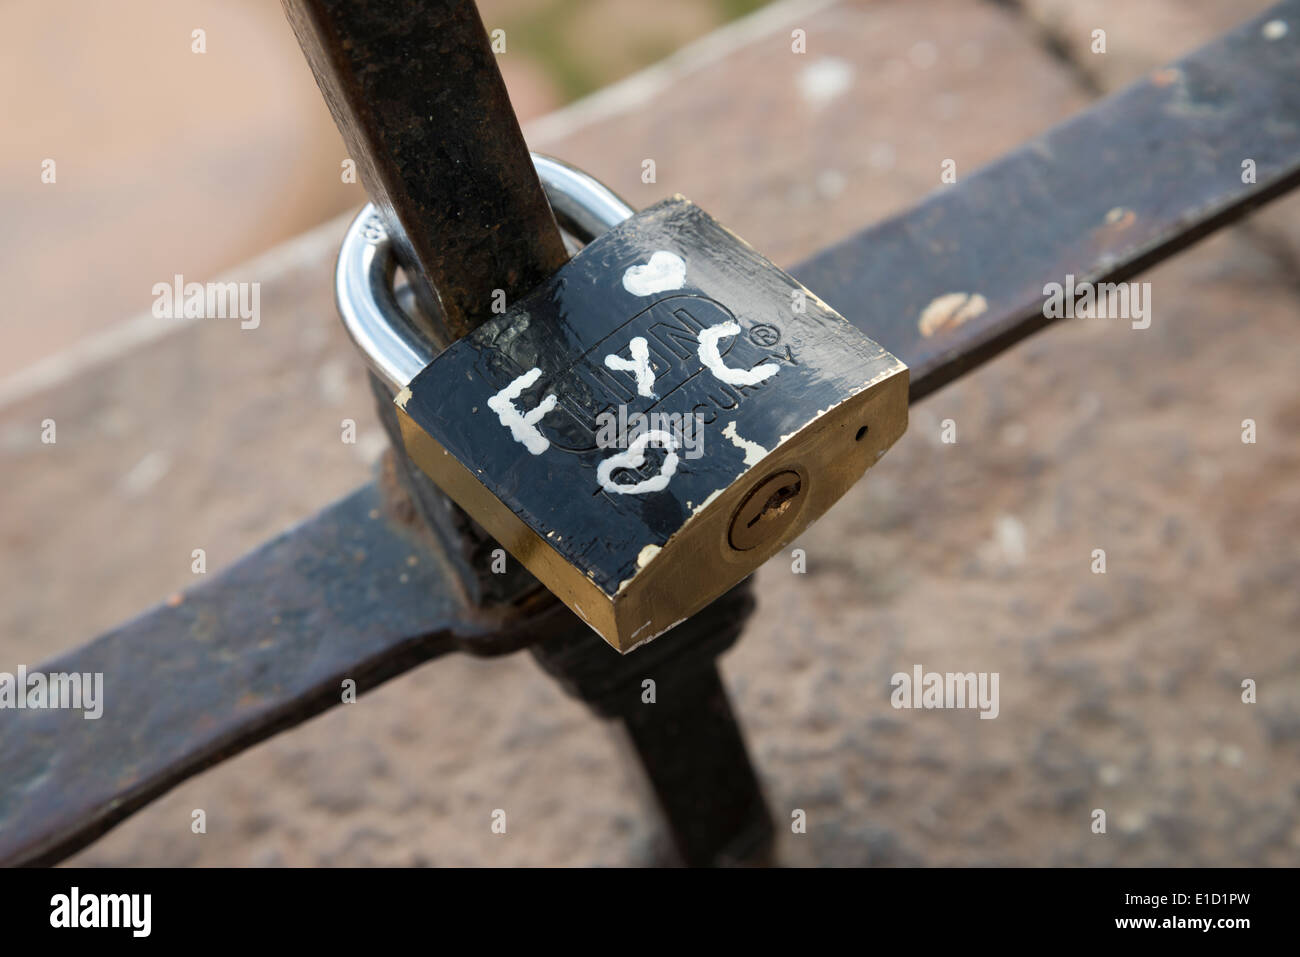 Padlock locked on railings, to represent two people's everlasting love for each other. Stock Photo